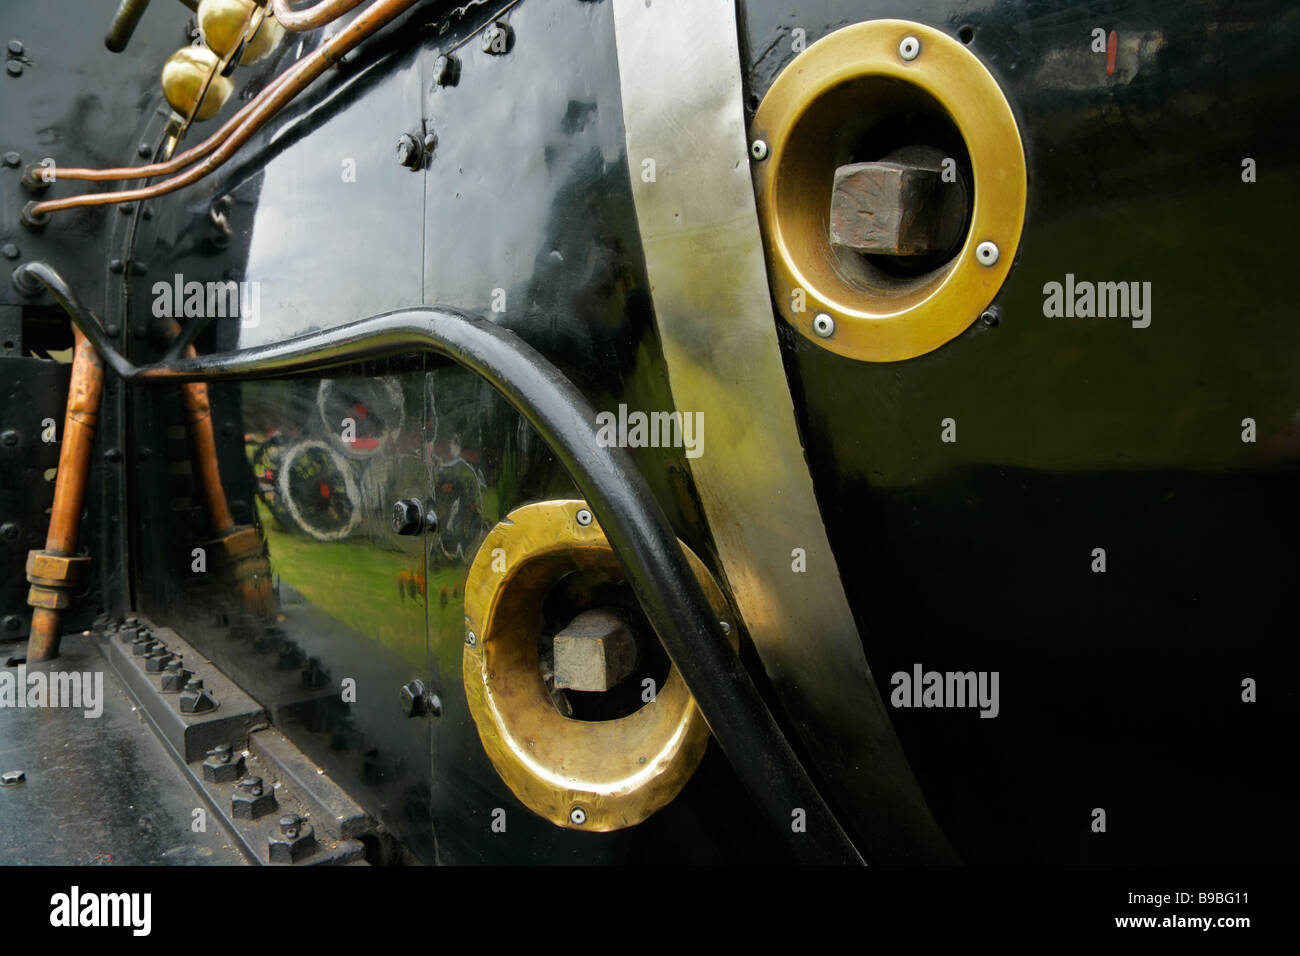 Close up of a vintage steam locomotive Stock Photo